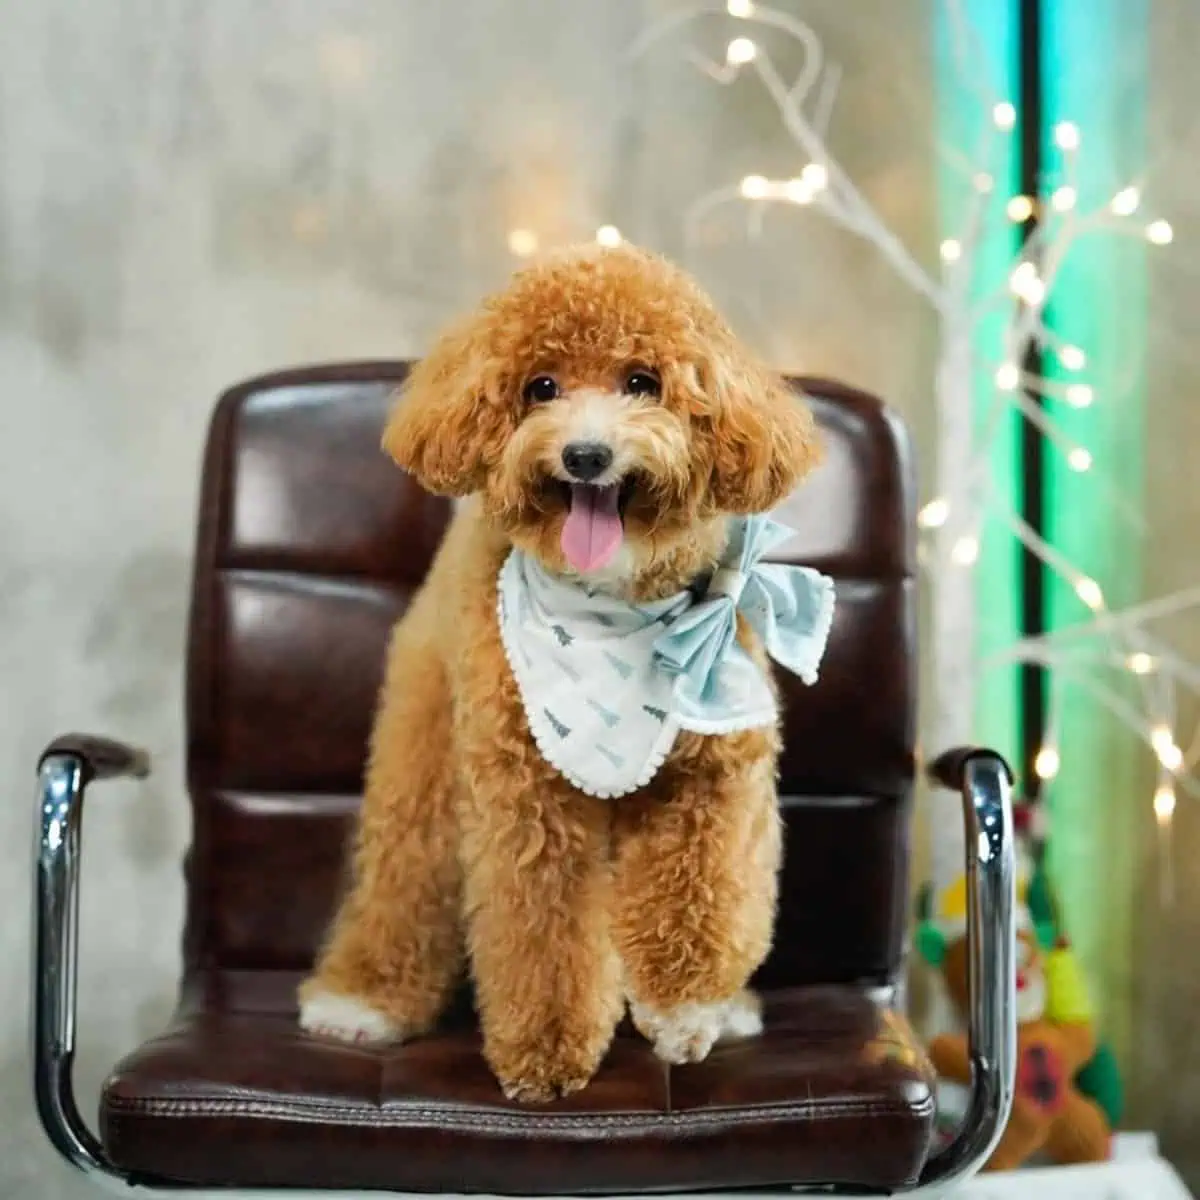 Poodle trained by owner